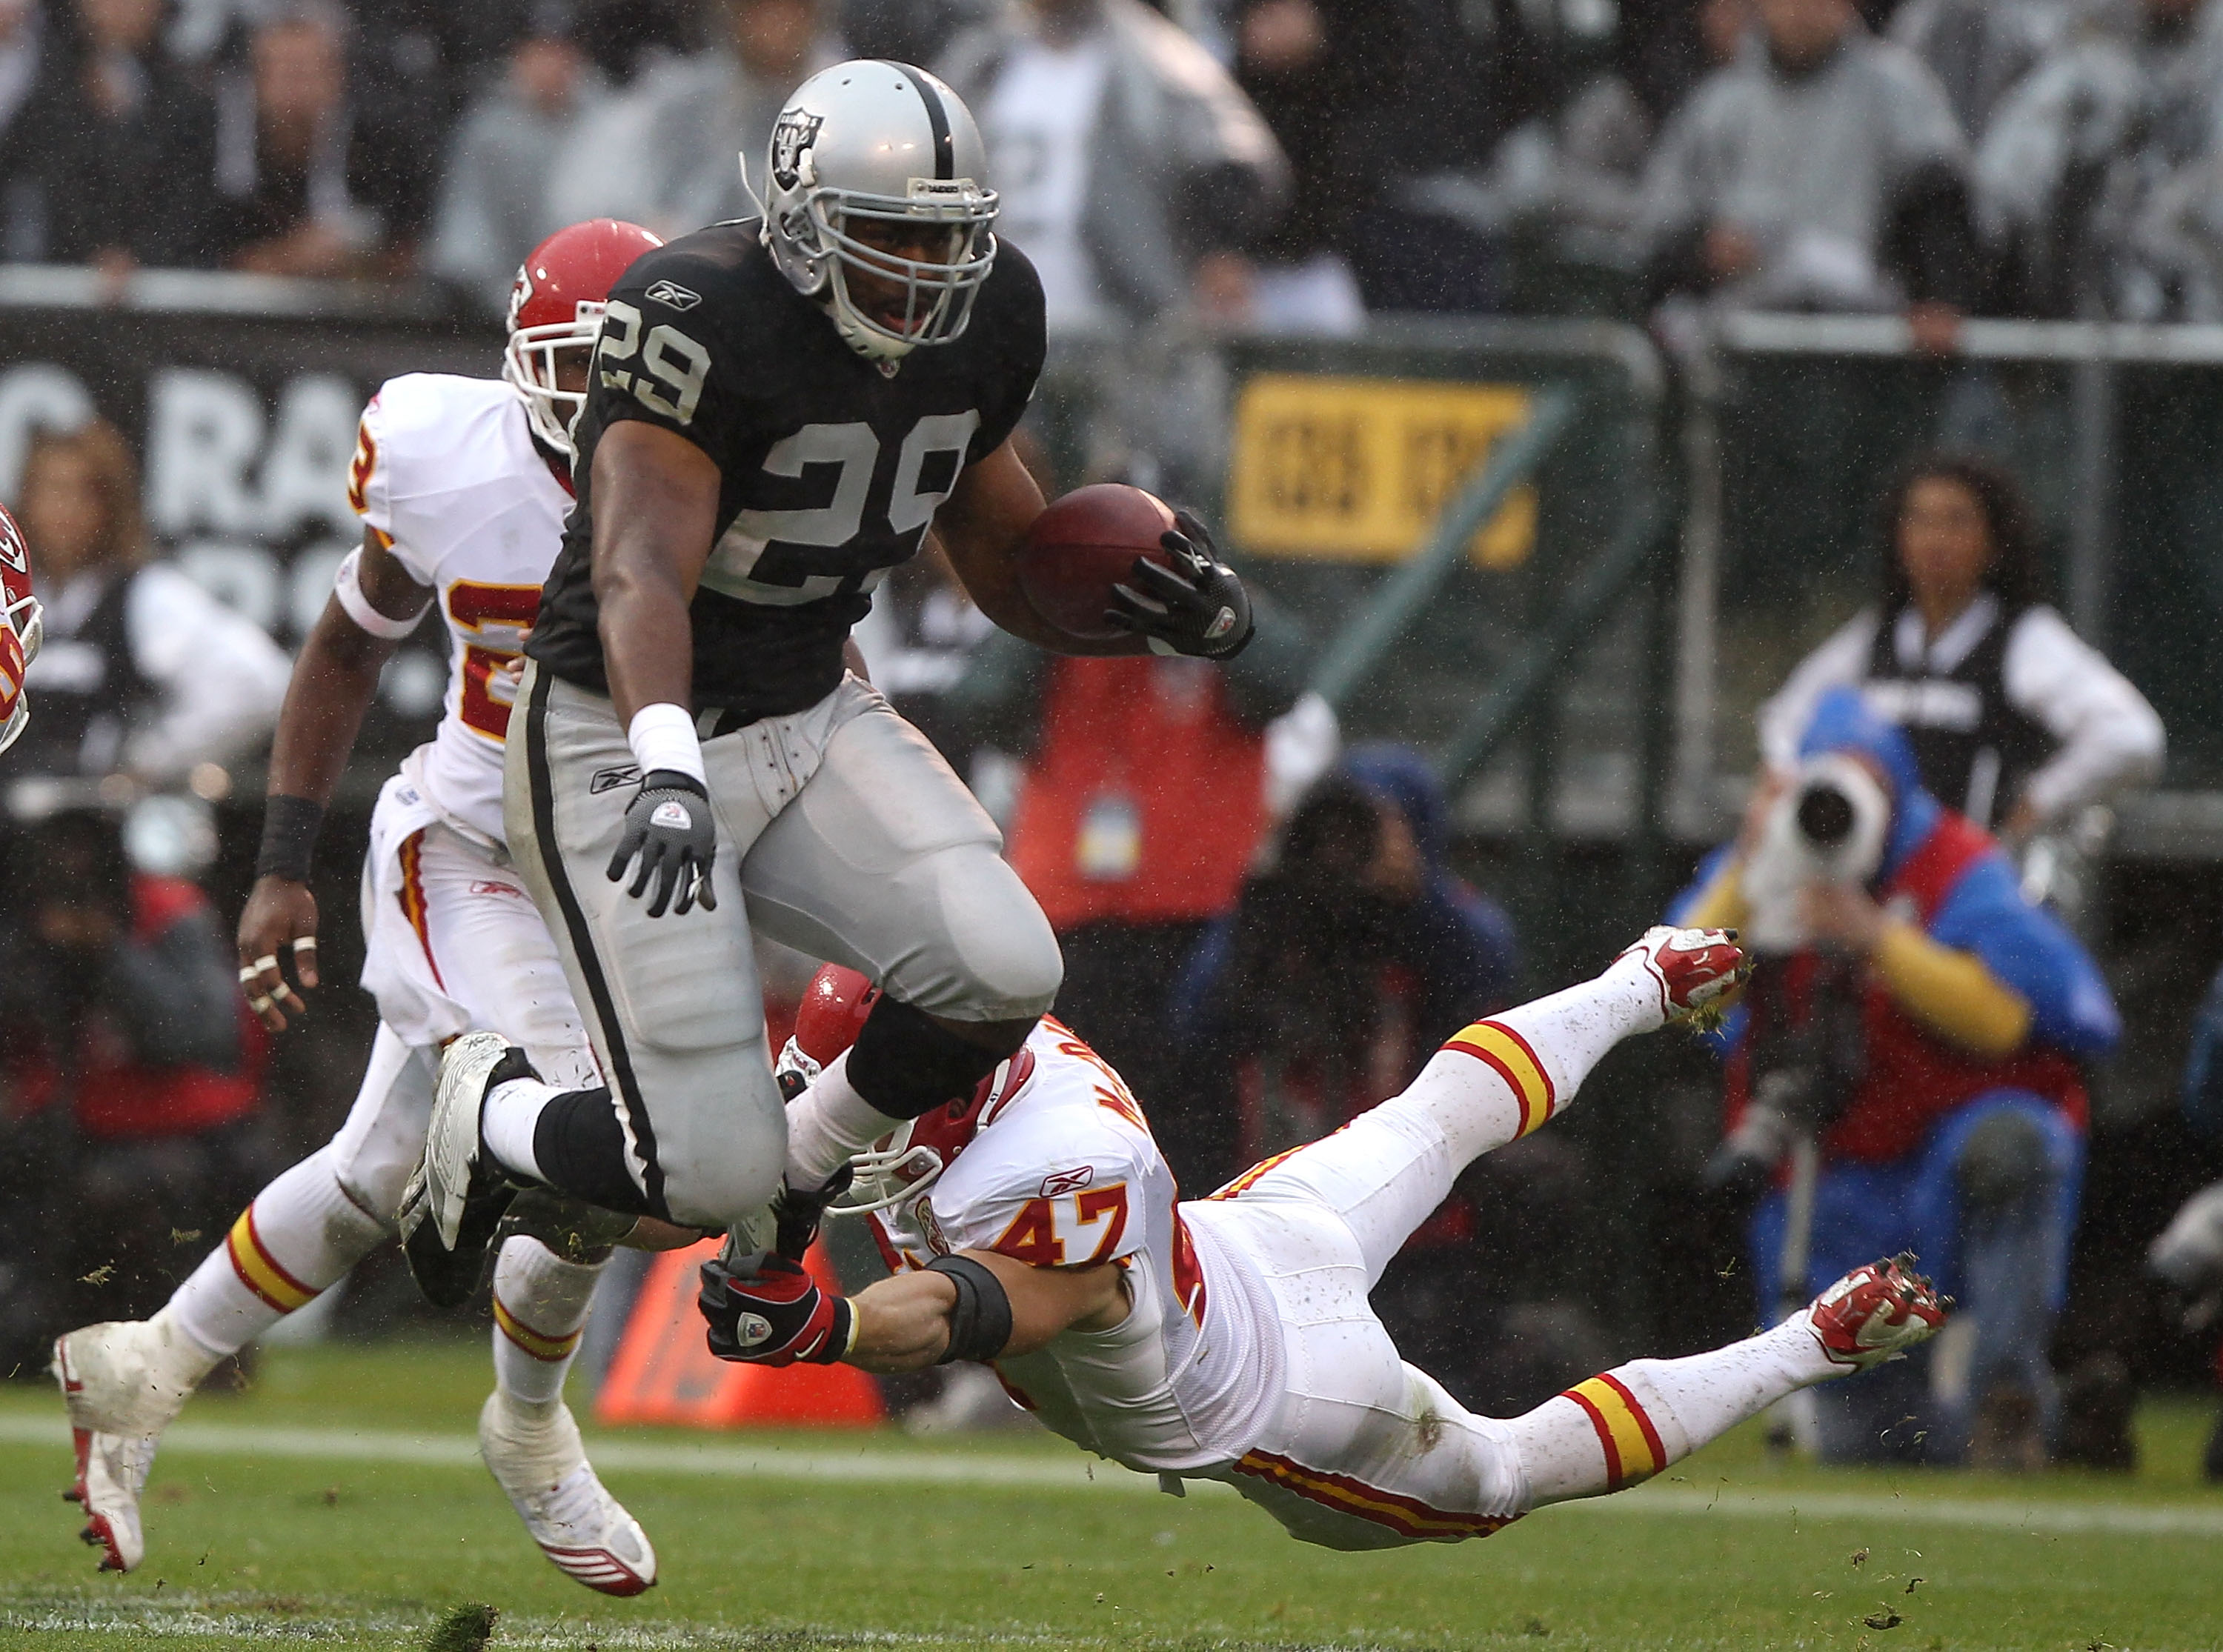 OAKLAND, CA - NOVEMBER 07:  Michael Bush #29 of the Oakland Raiders runs against Jon McGraw  #47 of the Kansas City Chiefs during an NFL game at Oakland-Alameda County Coliseum on November 7, 2010 in Oakland, California.  (Photo by Jed Jacobsohn/Getty Ima